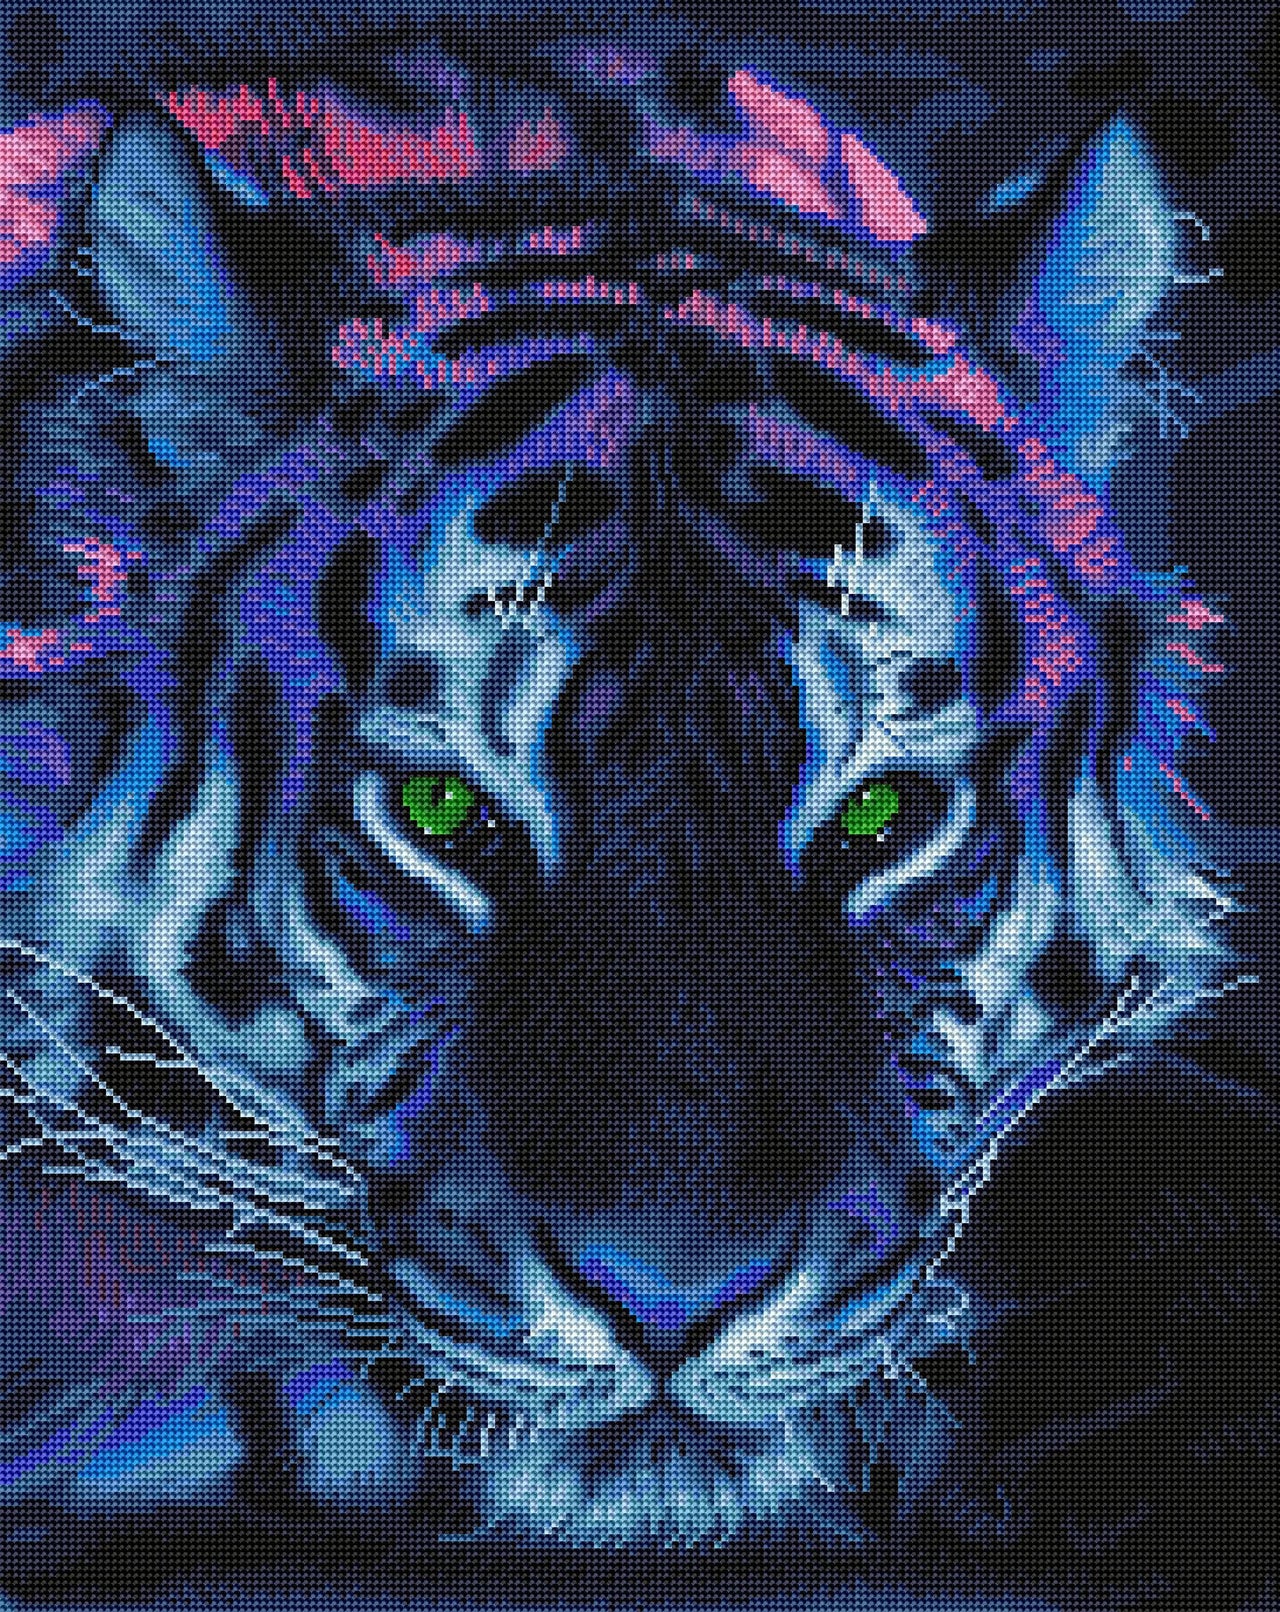 Diamond Painting The Tiger's Stare 20" x 25" (50.7cm x 63.9cm) / Round with 35 Colors including 4 ABs / 41,268